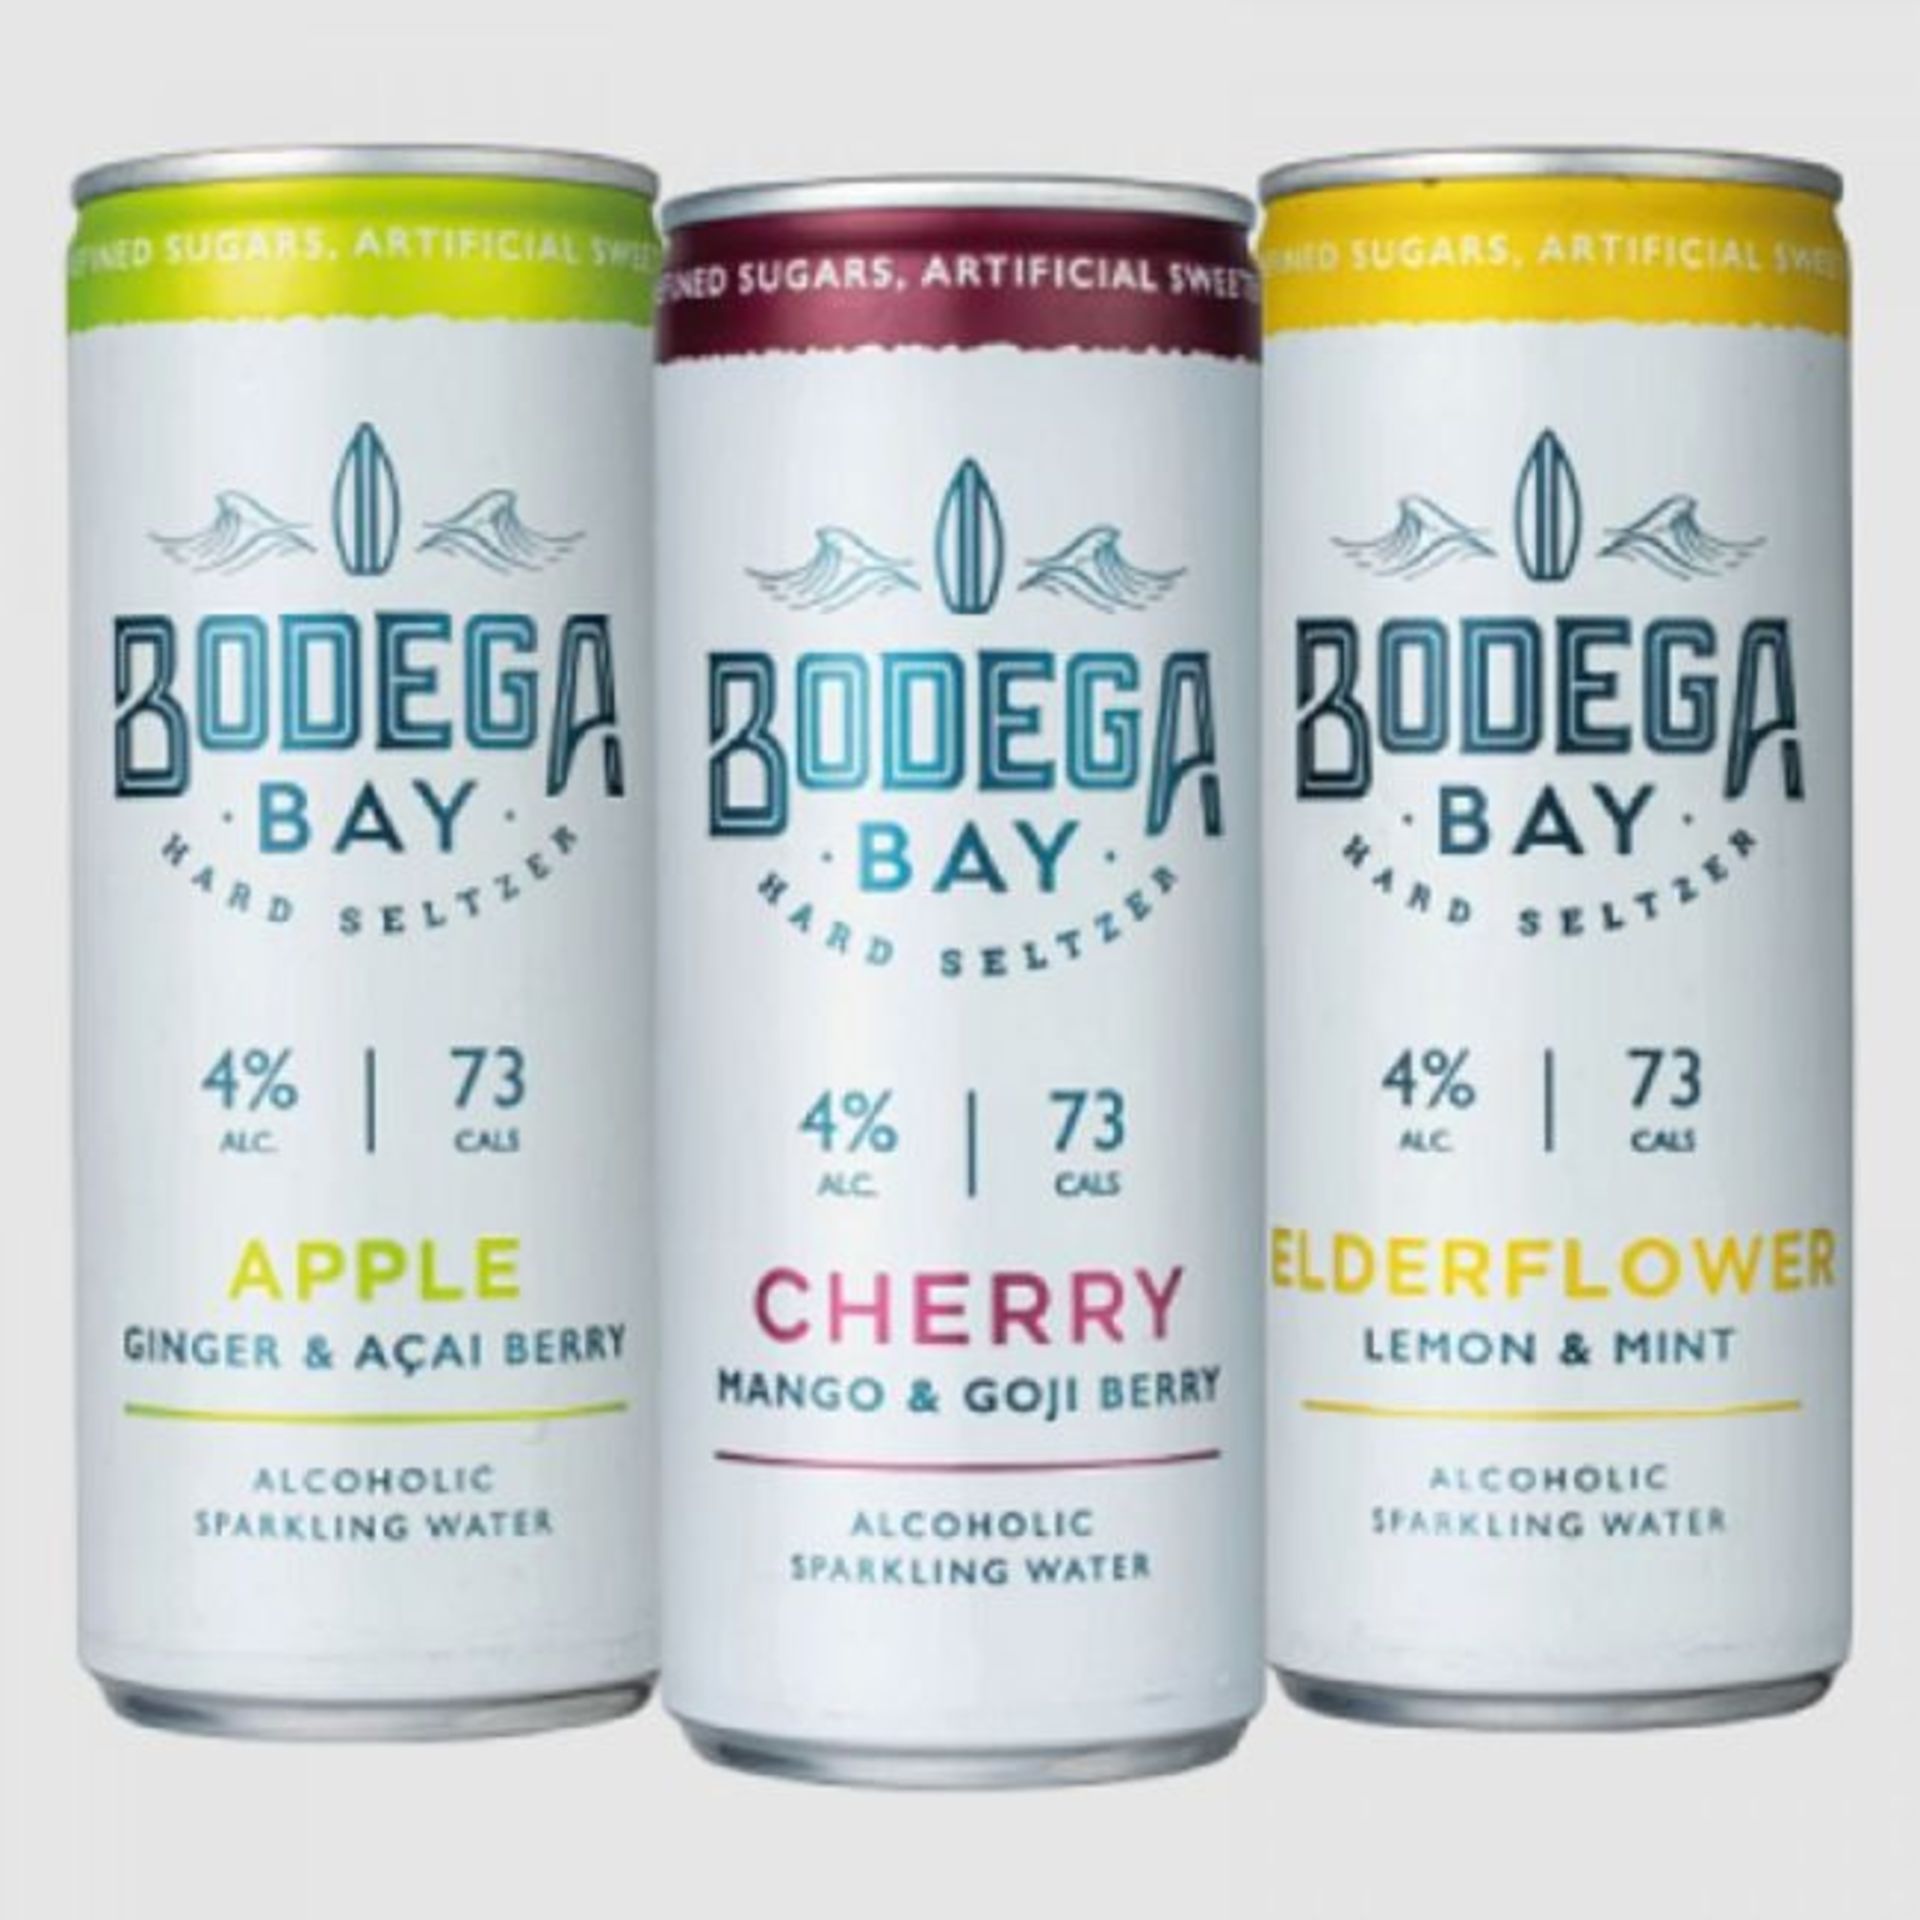 1,080 x Cans of Bodega Bay Hard Seltzer 250ml Alcoholic Sparkling Water Drinks - RESALE JOB LOT - Image 13 of 21